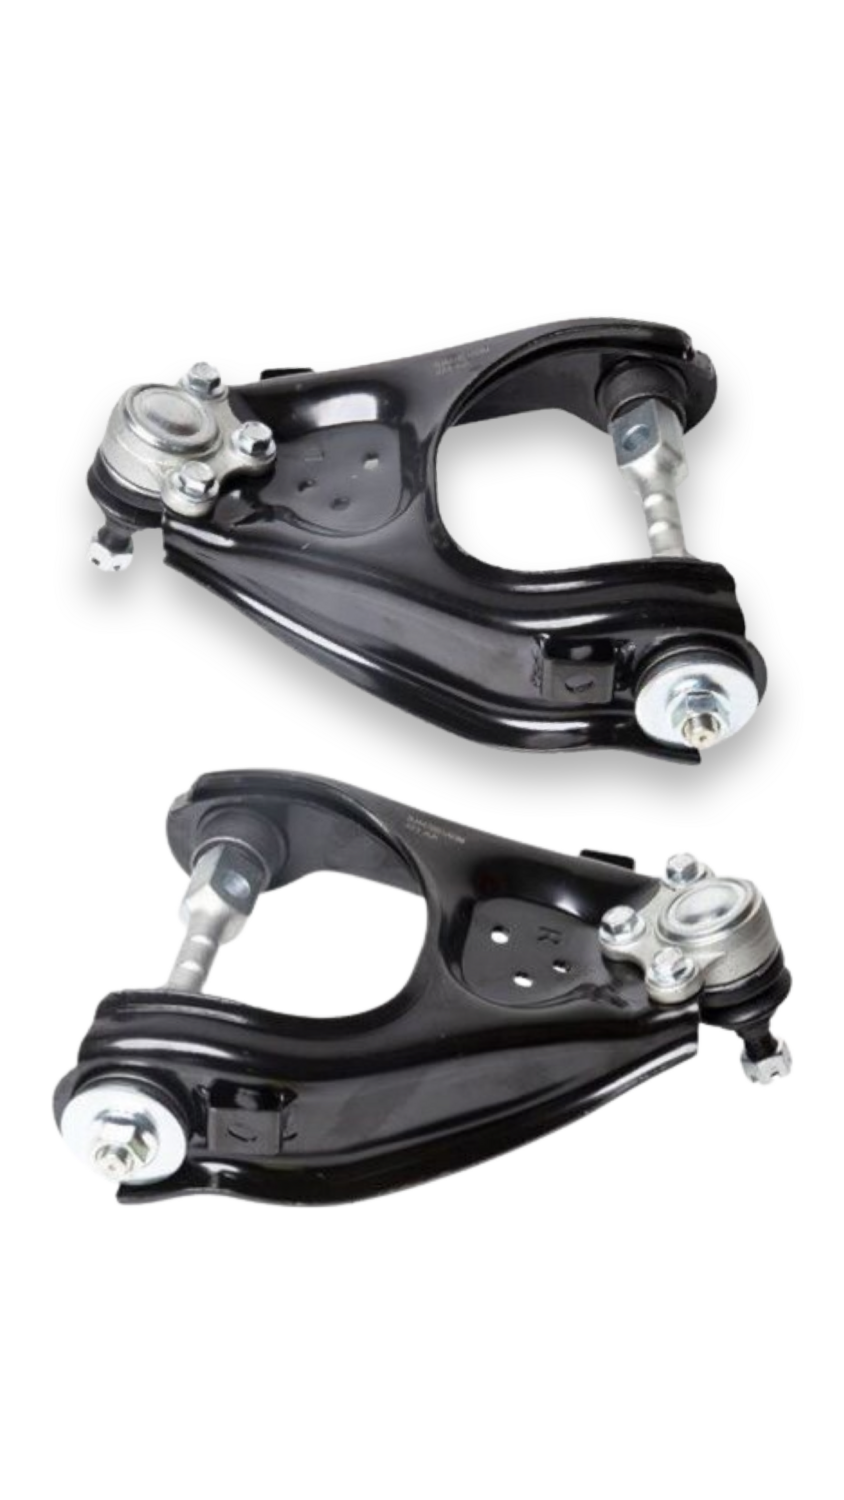 Pair of Front Upper Control Arms - Suit RA/RC D-Max